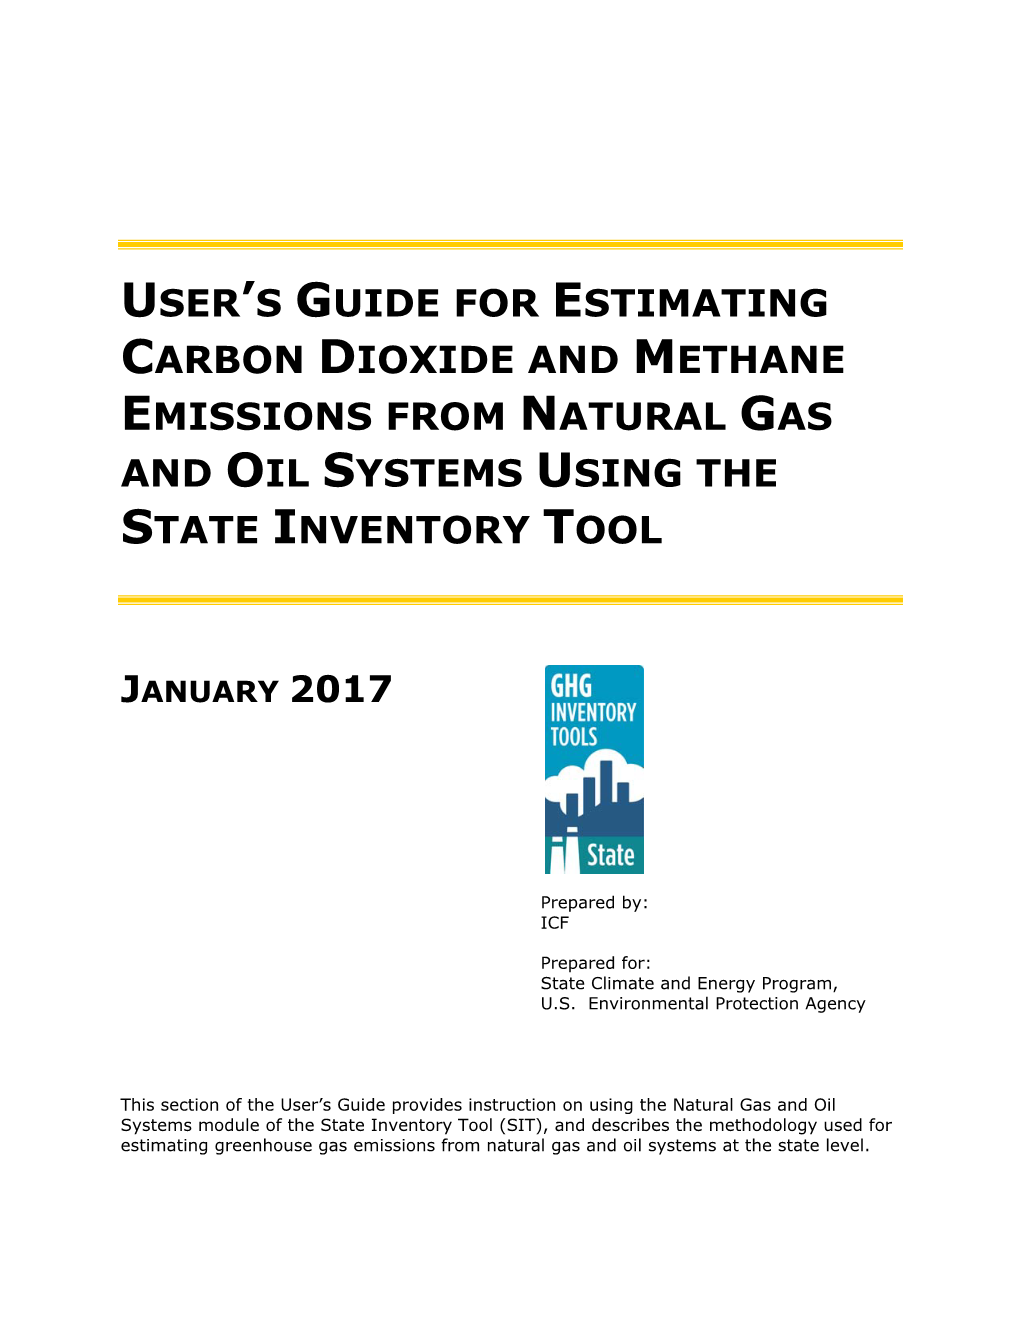 User's Guide for Estimating Carbon Dioxide and Methane Emissions from Natural Gas and Oil Systems Using the State Inventory To